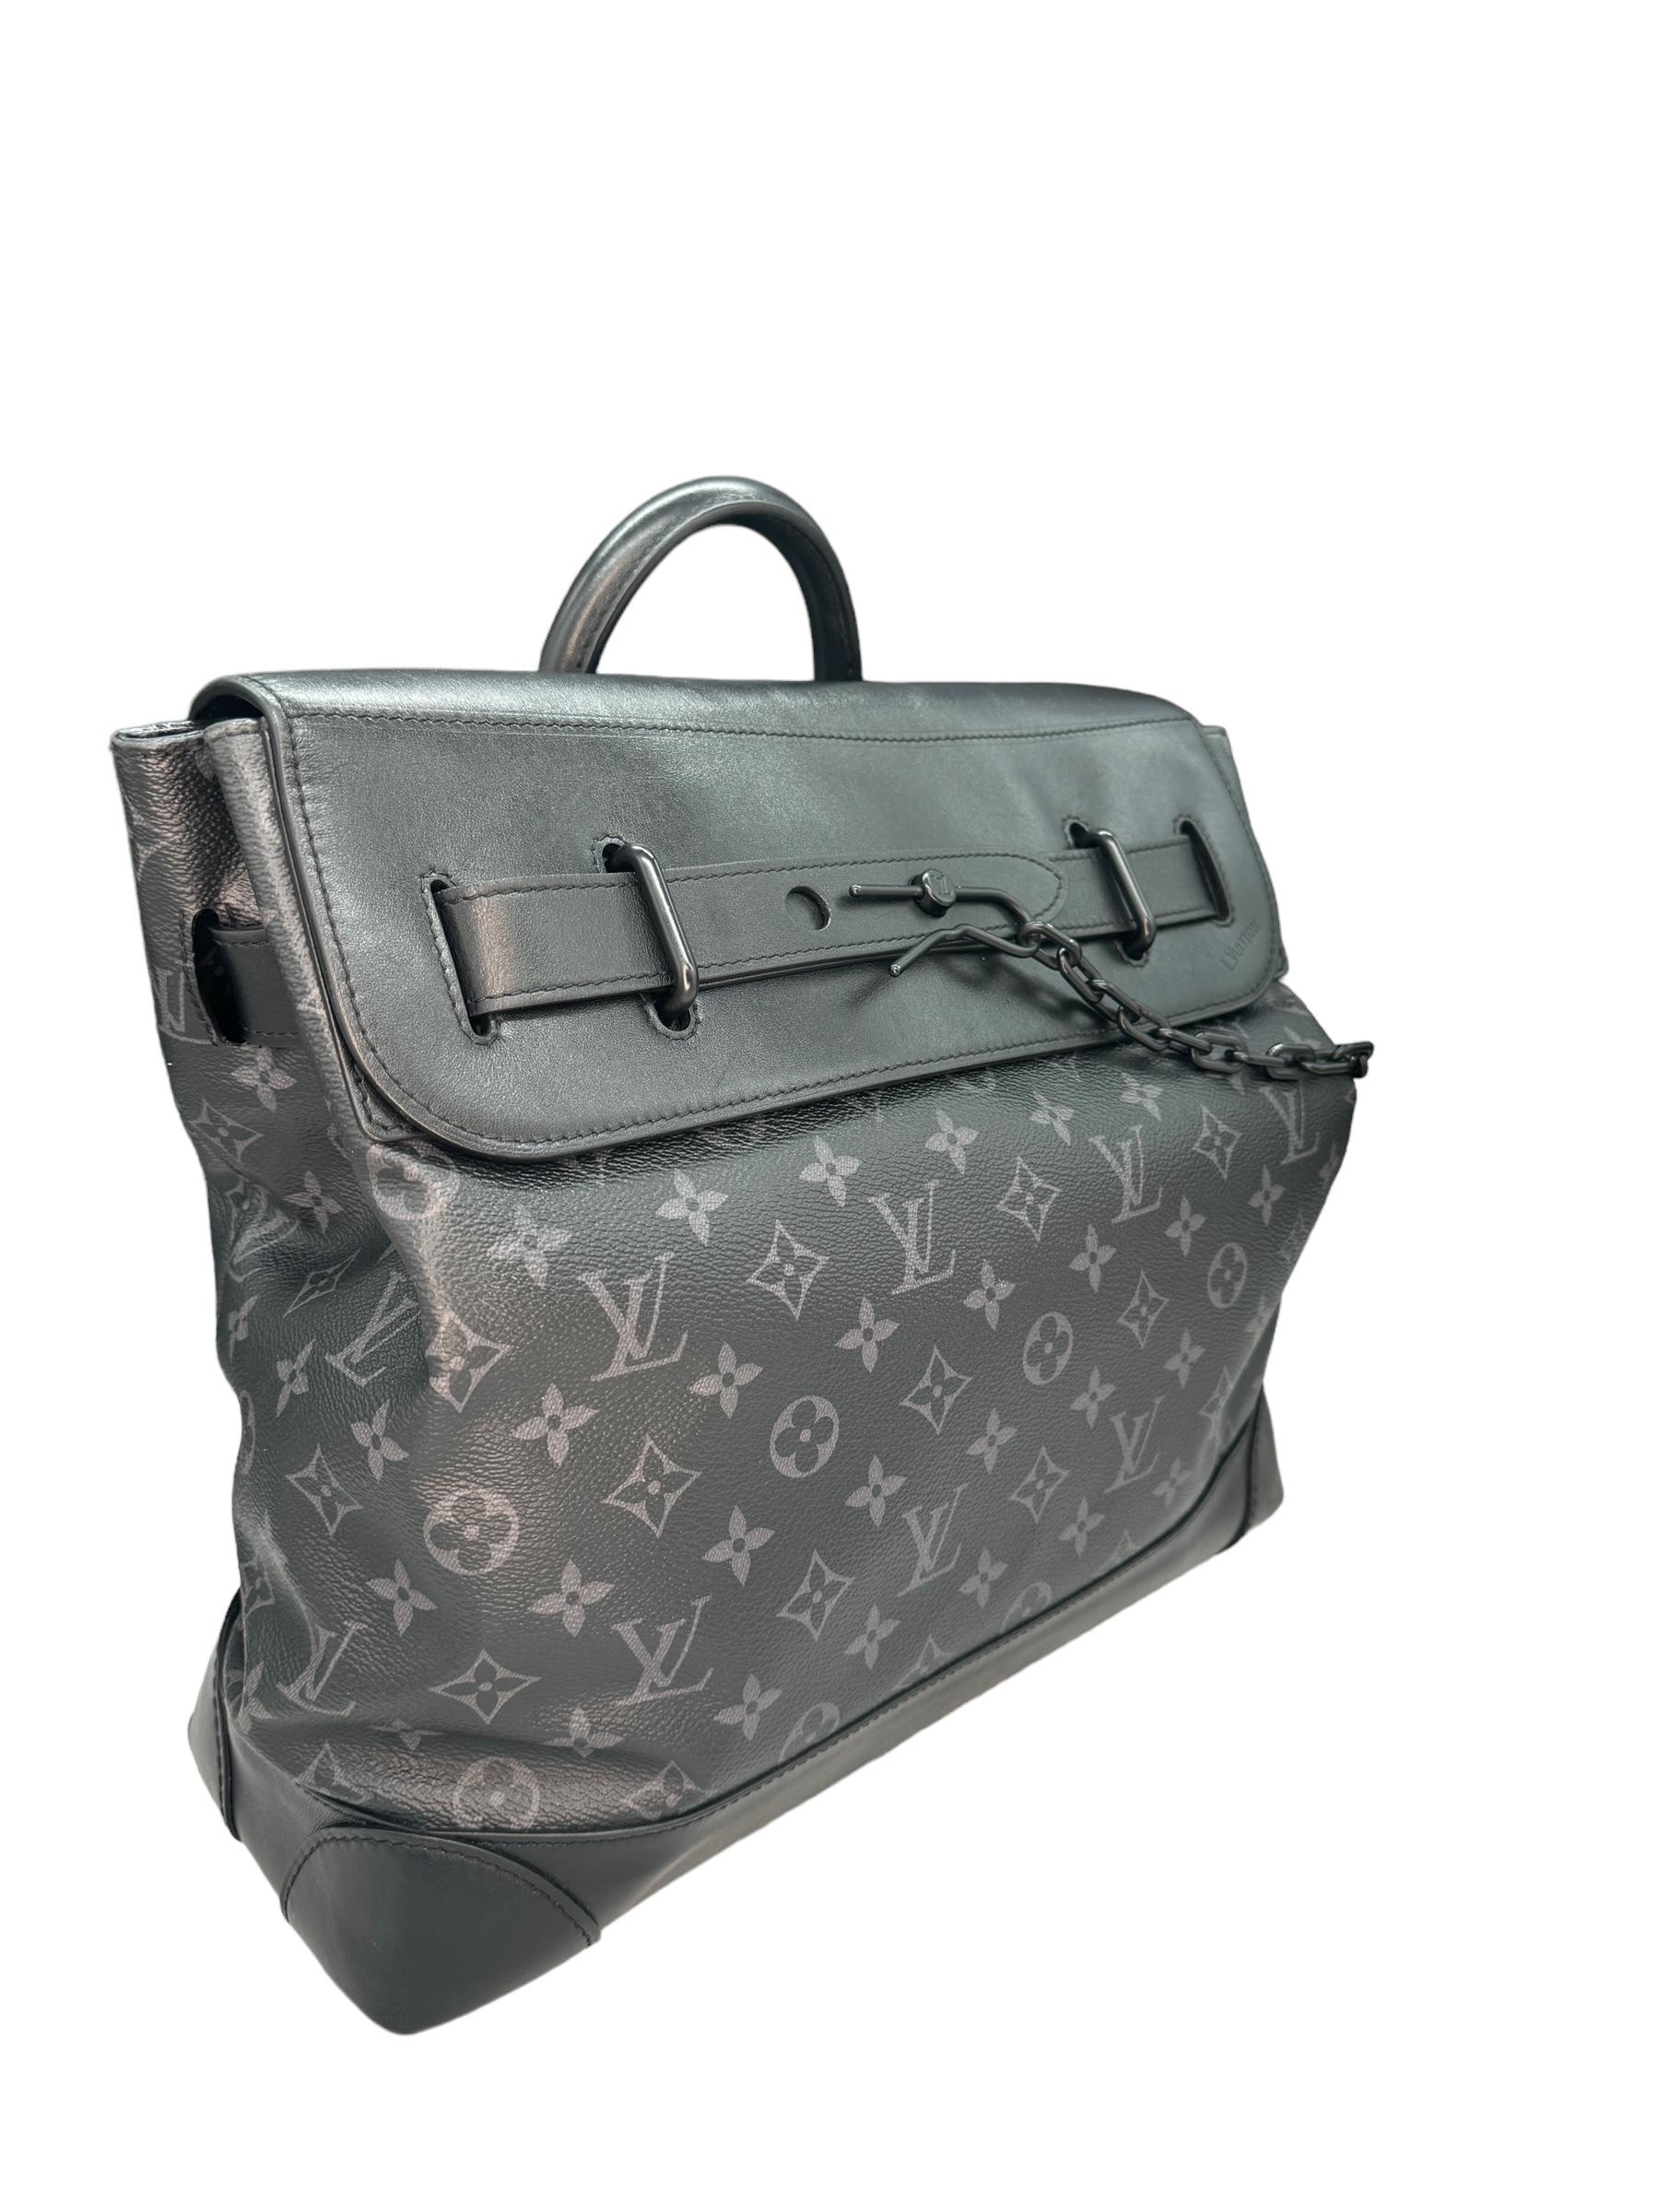 Louis Vuitton Monogram Eclipse PM. This bag was crafted with a combination of black leather and LV's iconic black and grey Monogram Eclipse canvas. It comes with a removeable black leather shoulder strap and matte black hardware. It features a